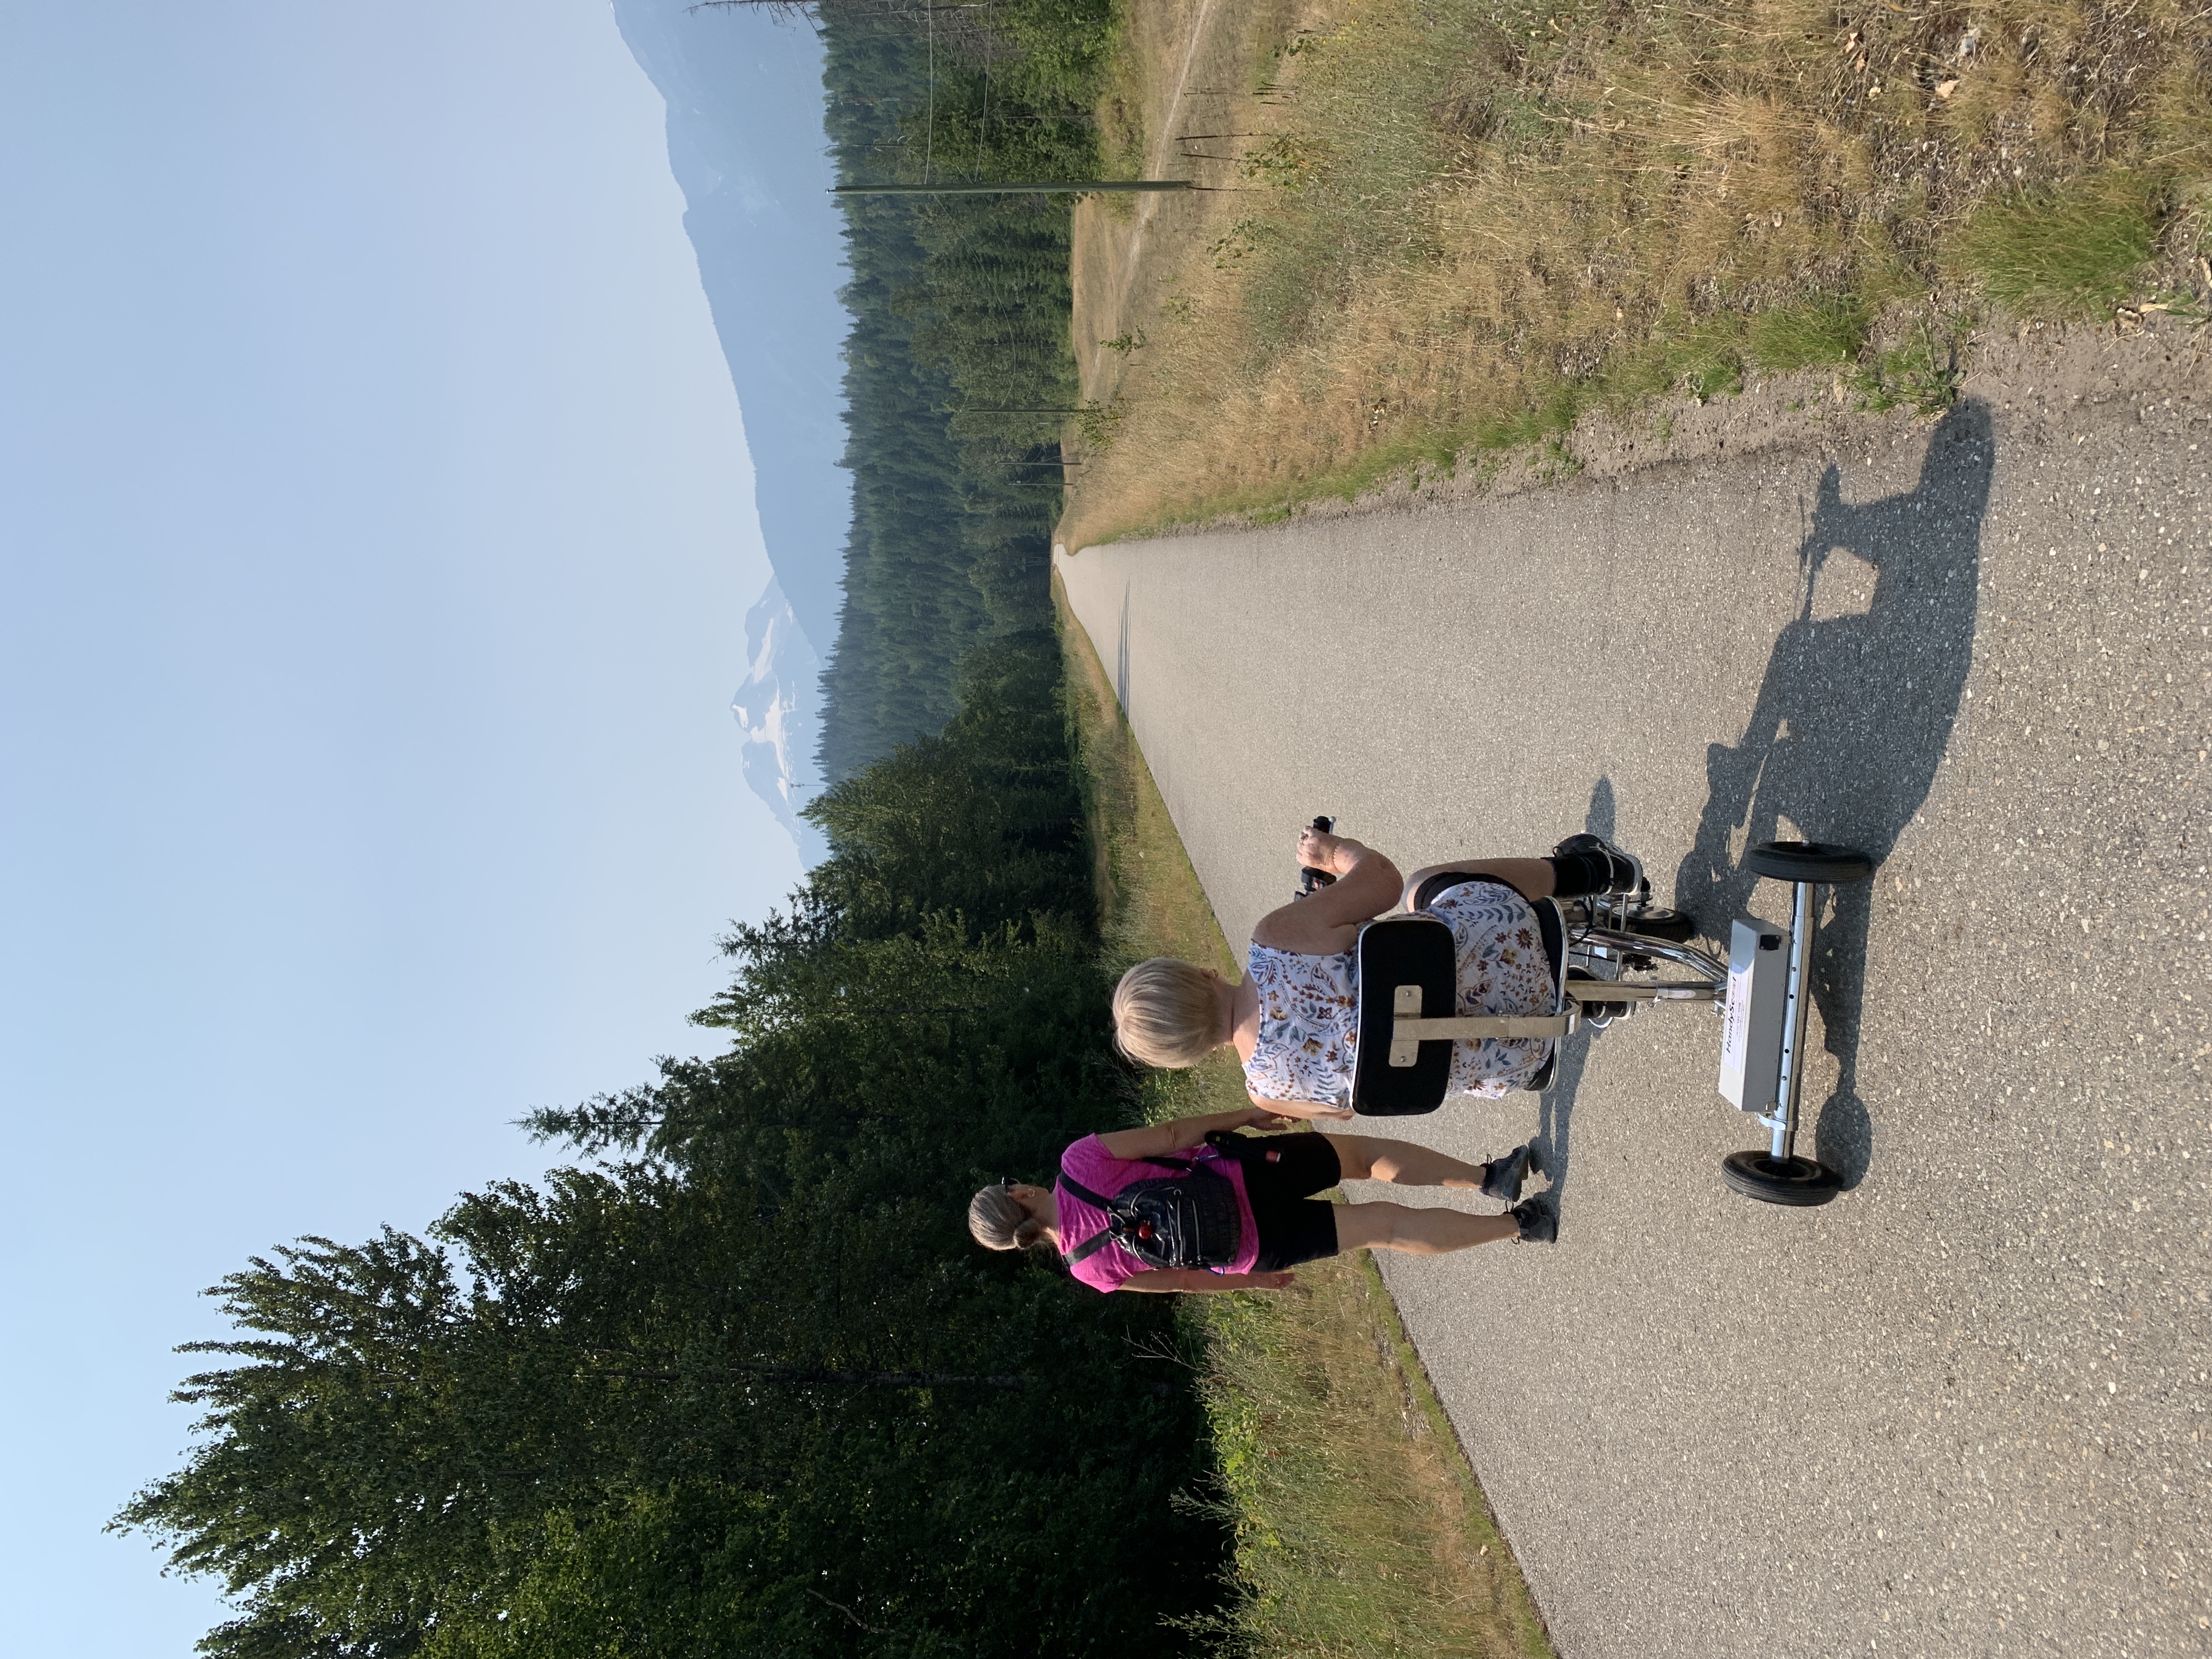 A woman riding a 3 wheel mobility scooter going for a ride with her daughter